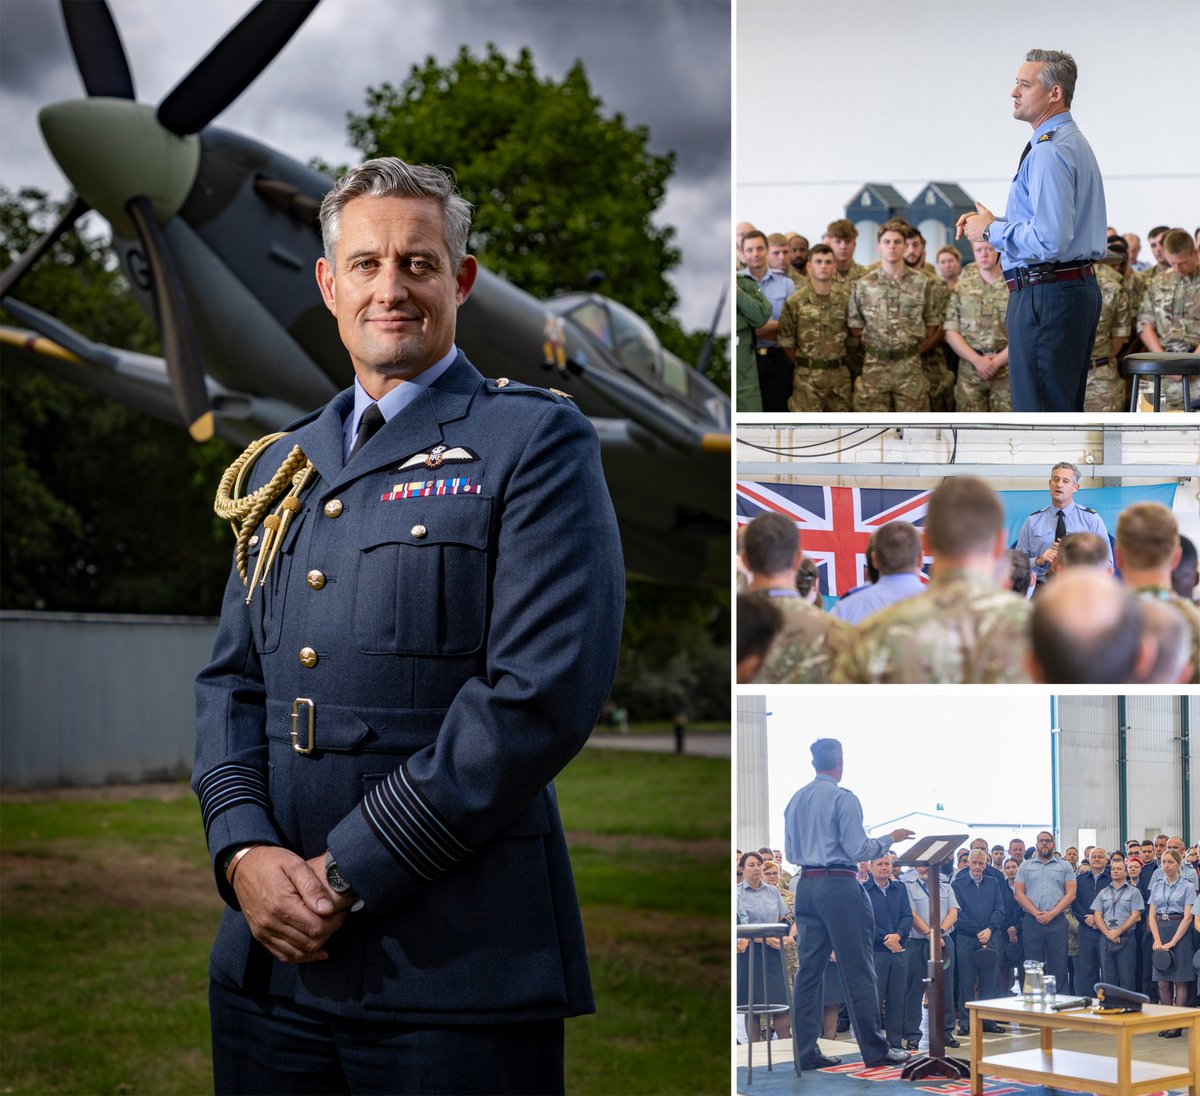 RAF Northolt formally welcomed its new Station Commander last week. Gp Capt Jon Hough arrives from the RAF’s HQ at High Wycombe and has a background in Defence diplomacy and as a pilot flying the RAF’s Hercules aircraft.